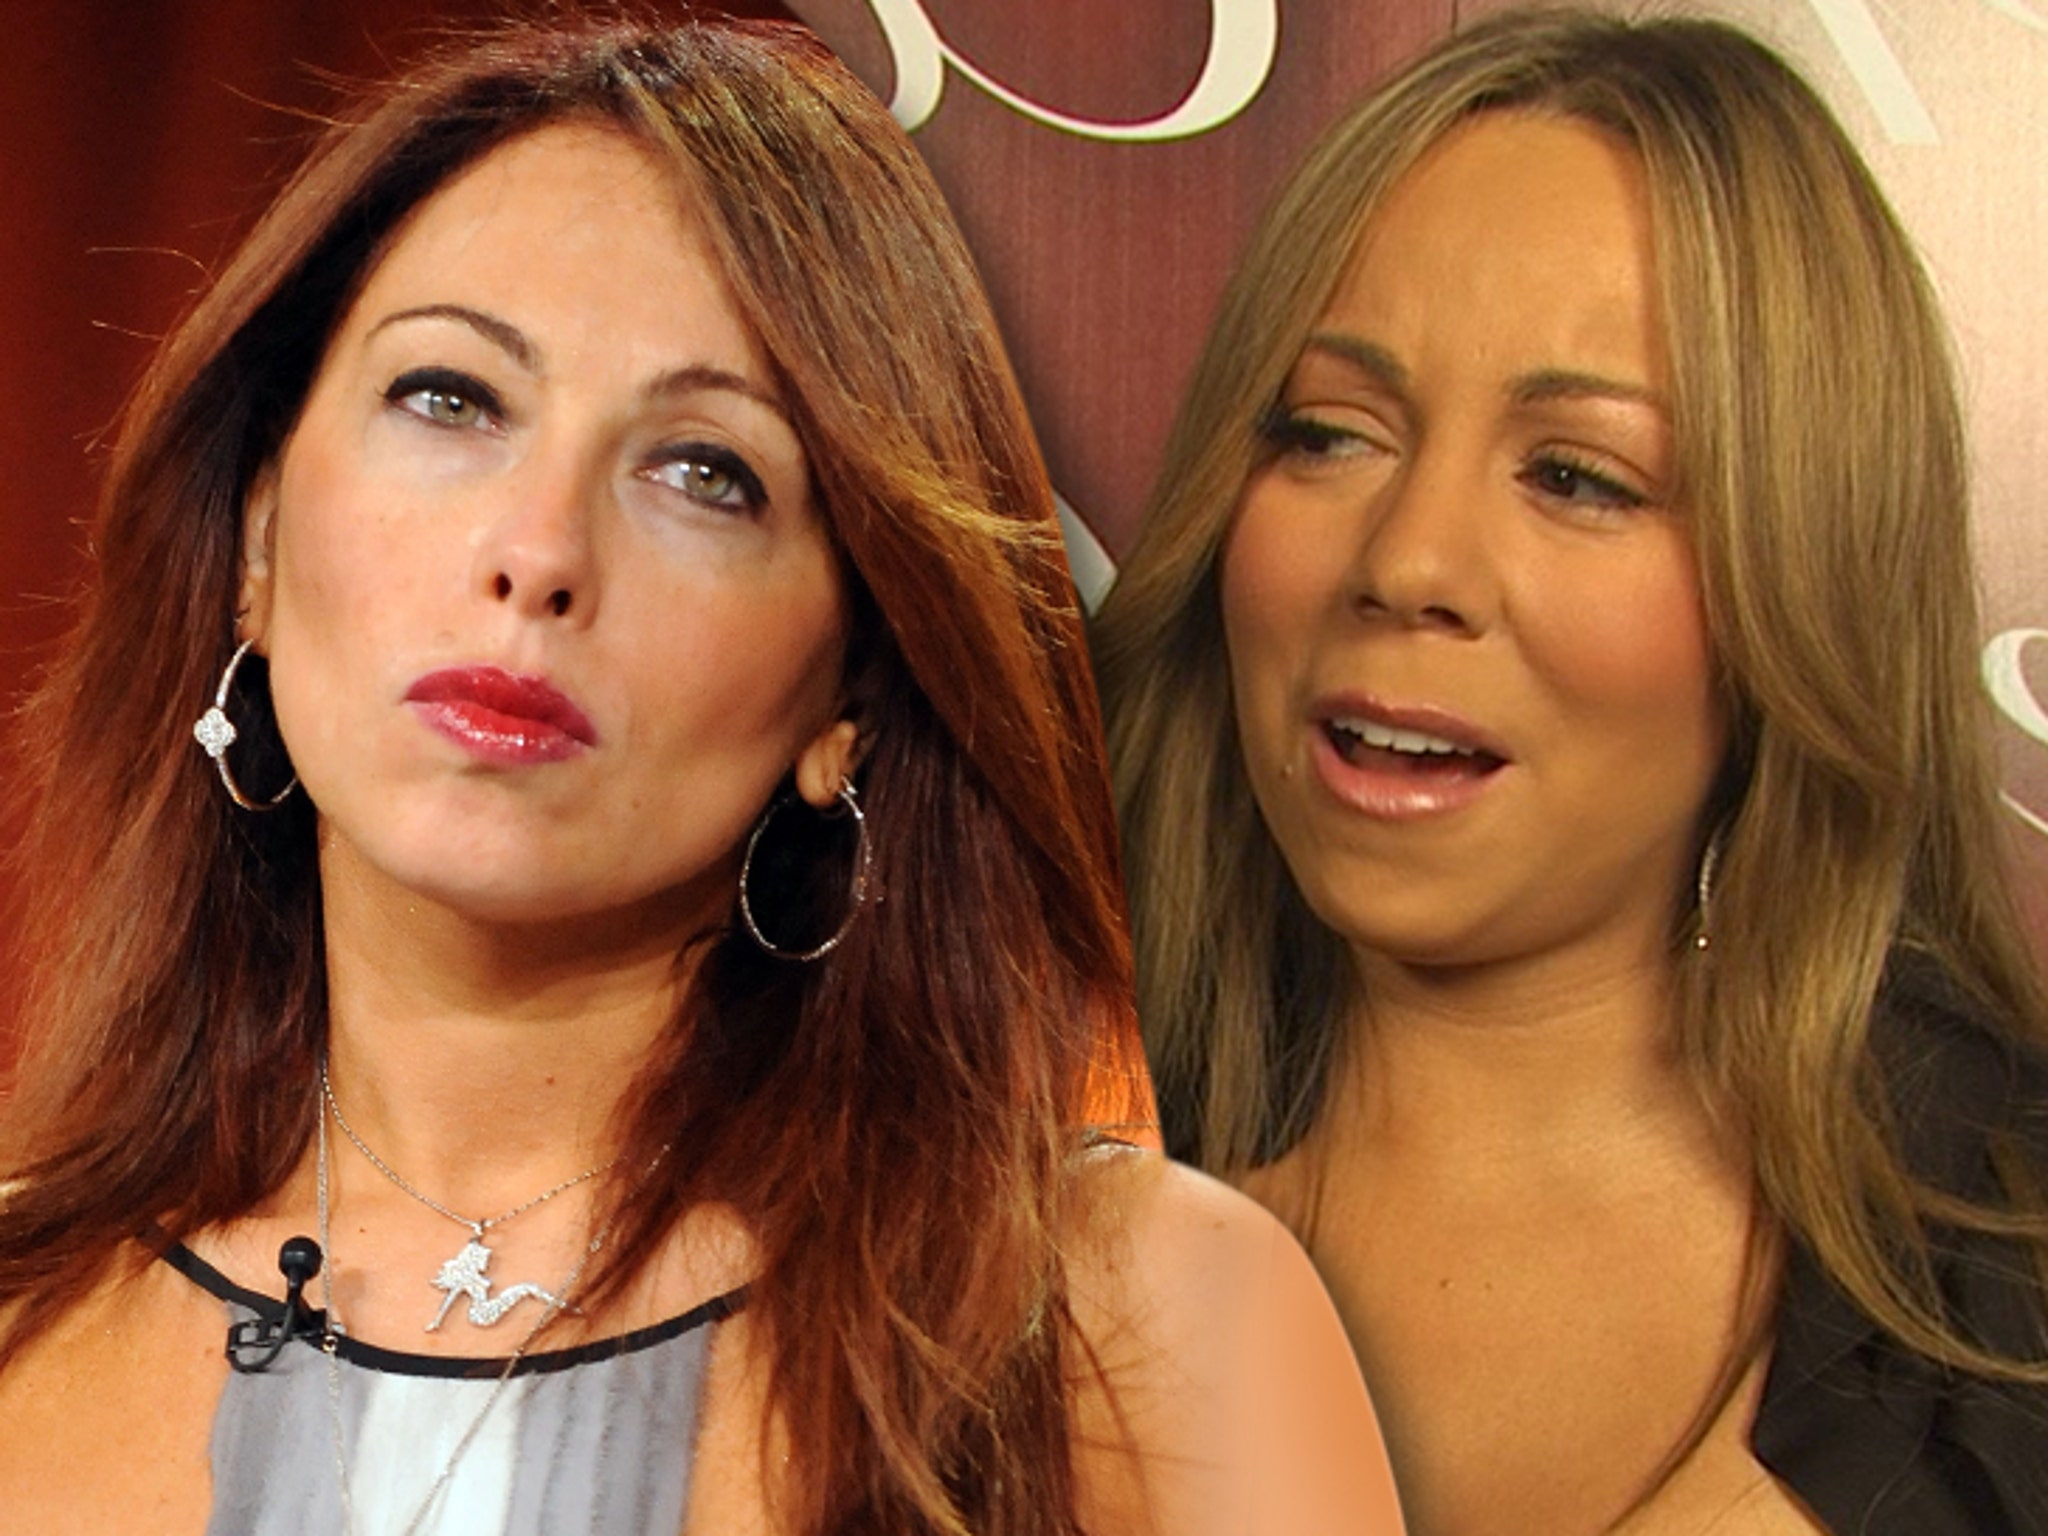 Mariah Careys Former Manager is Claiming Sexual Harassment picture